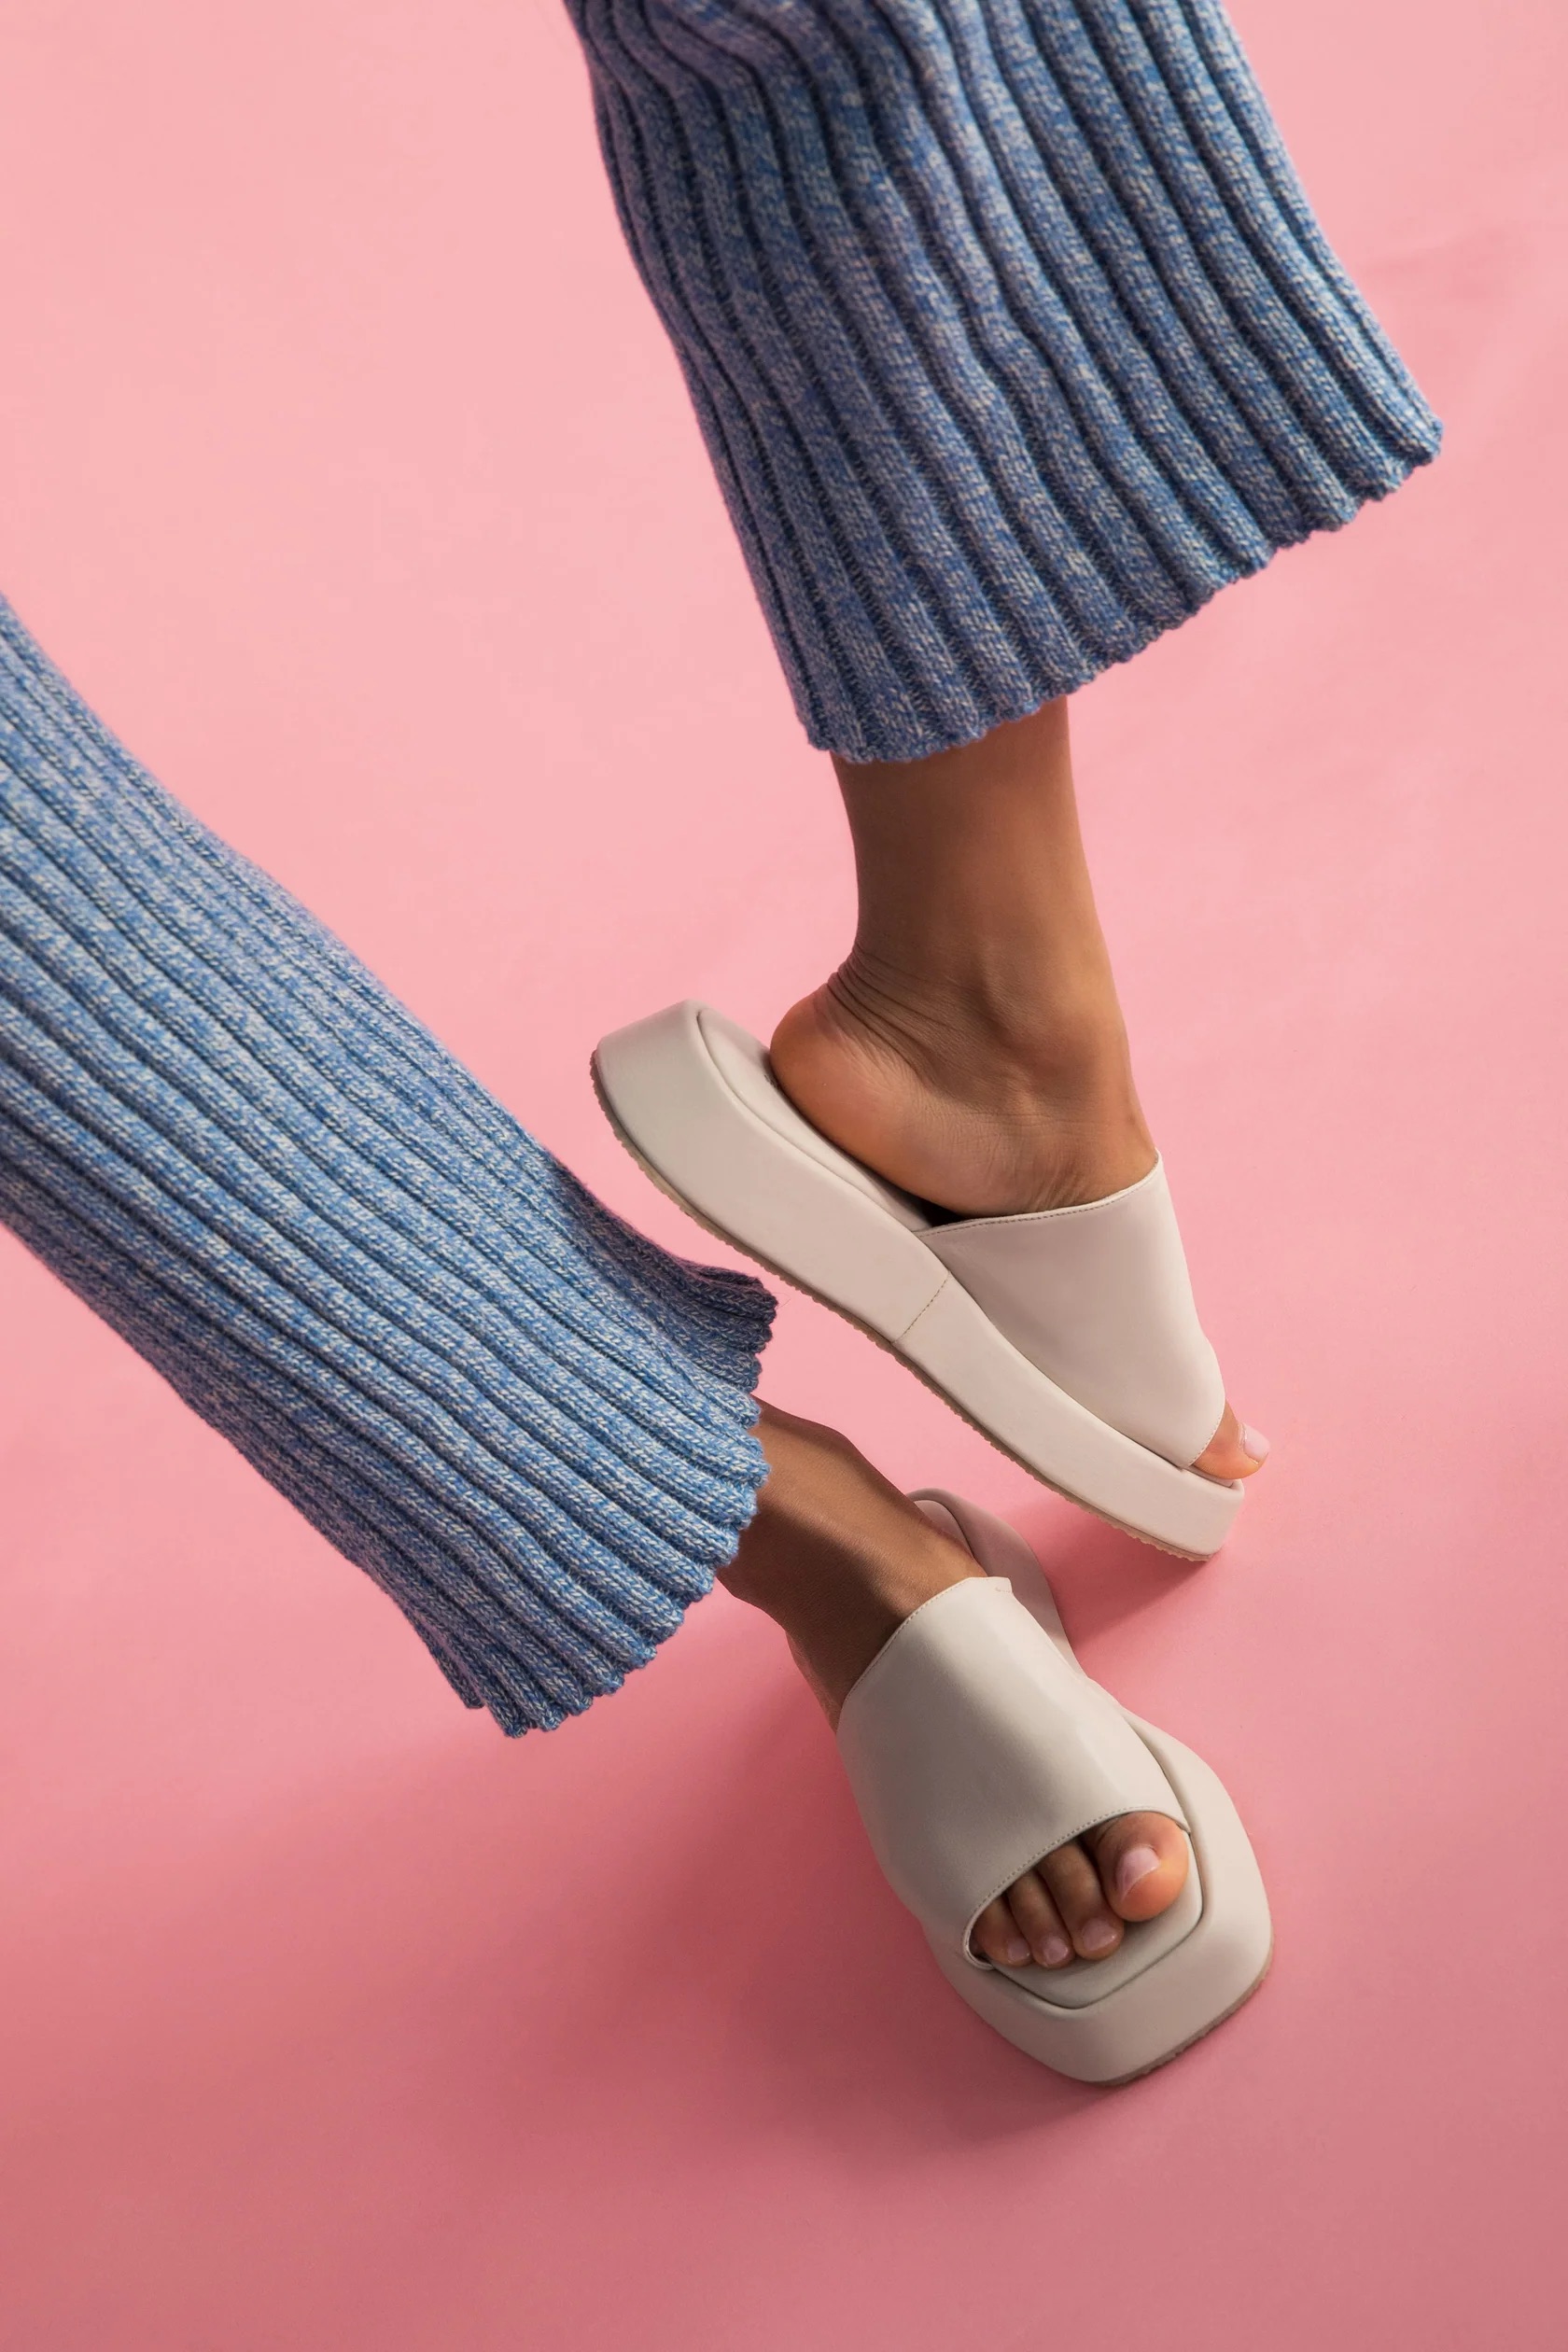 Close-up of a person wearing blue ribbed pants and beige platform slides with an open-toe design, positioned against a pink background.